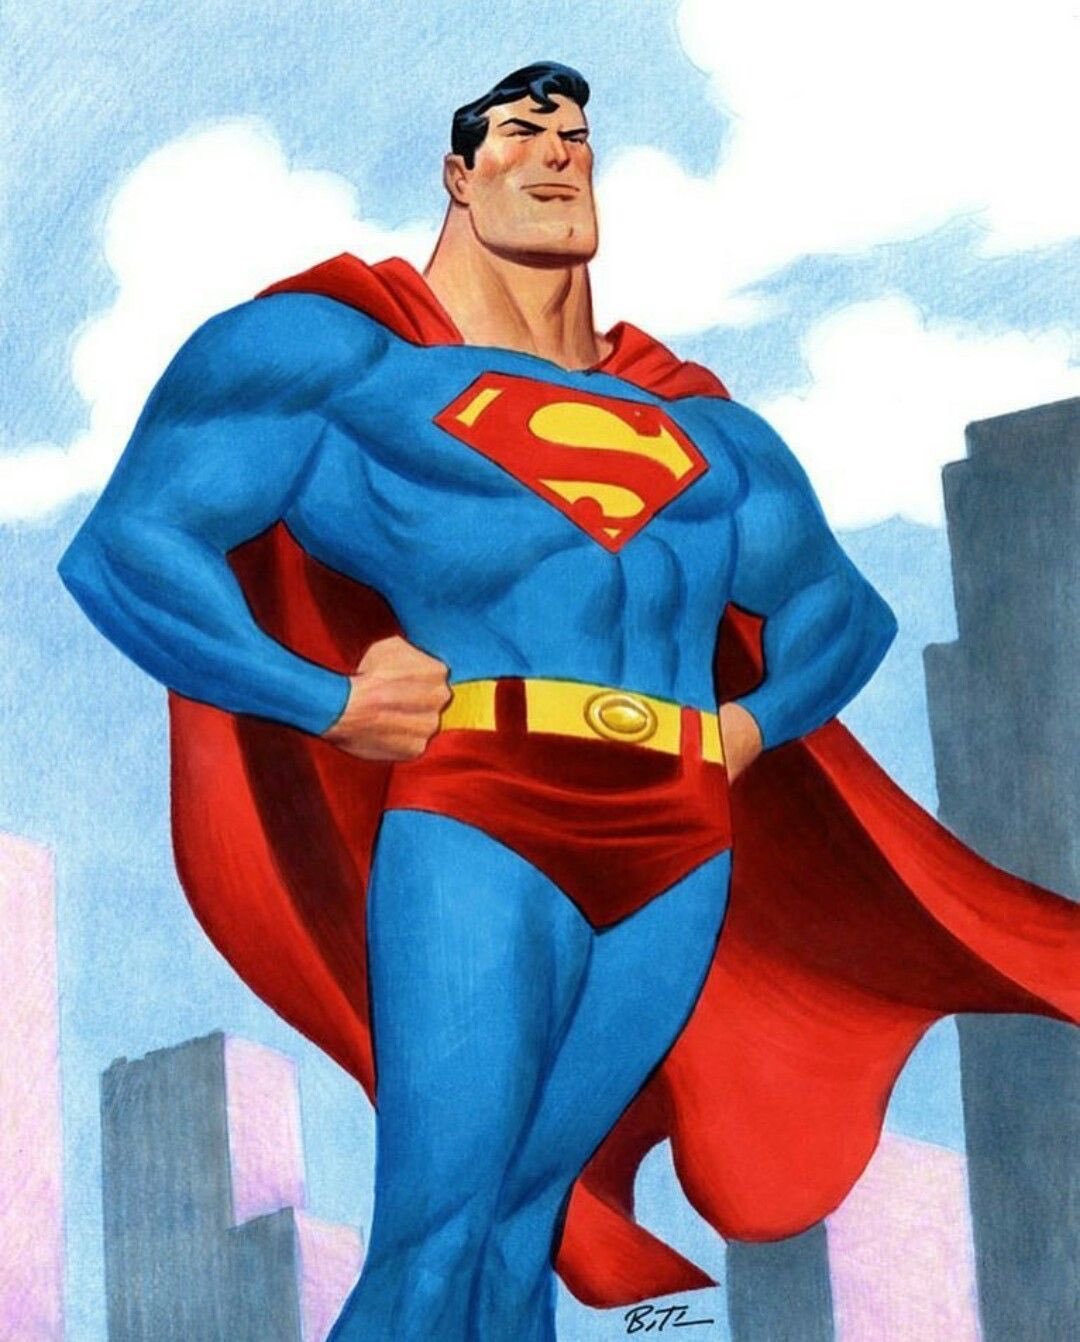 Superman Art by Bruce Timm